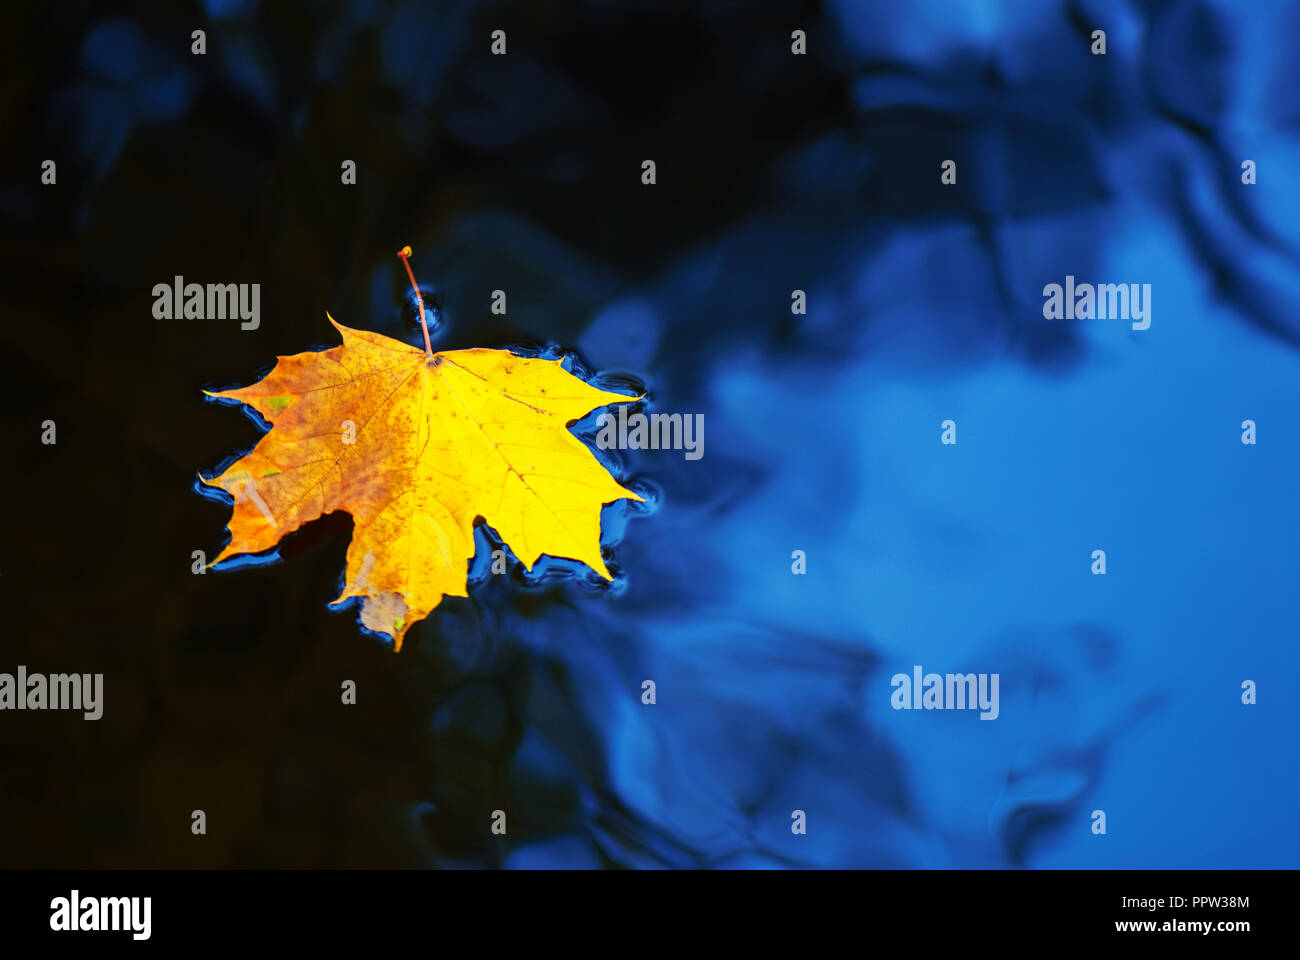 Fallen maple leaf in autumn colors floating on water surface.Maple leaf floating on water Stock Photo